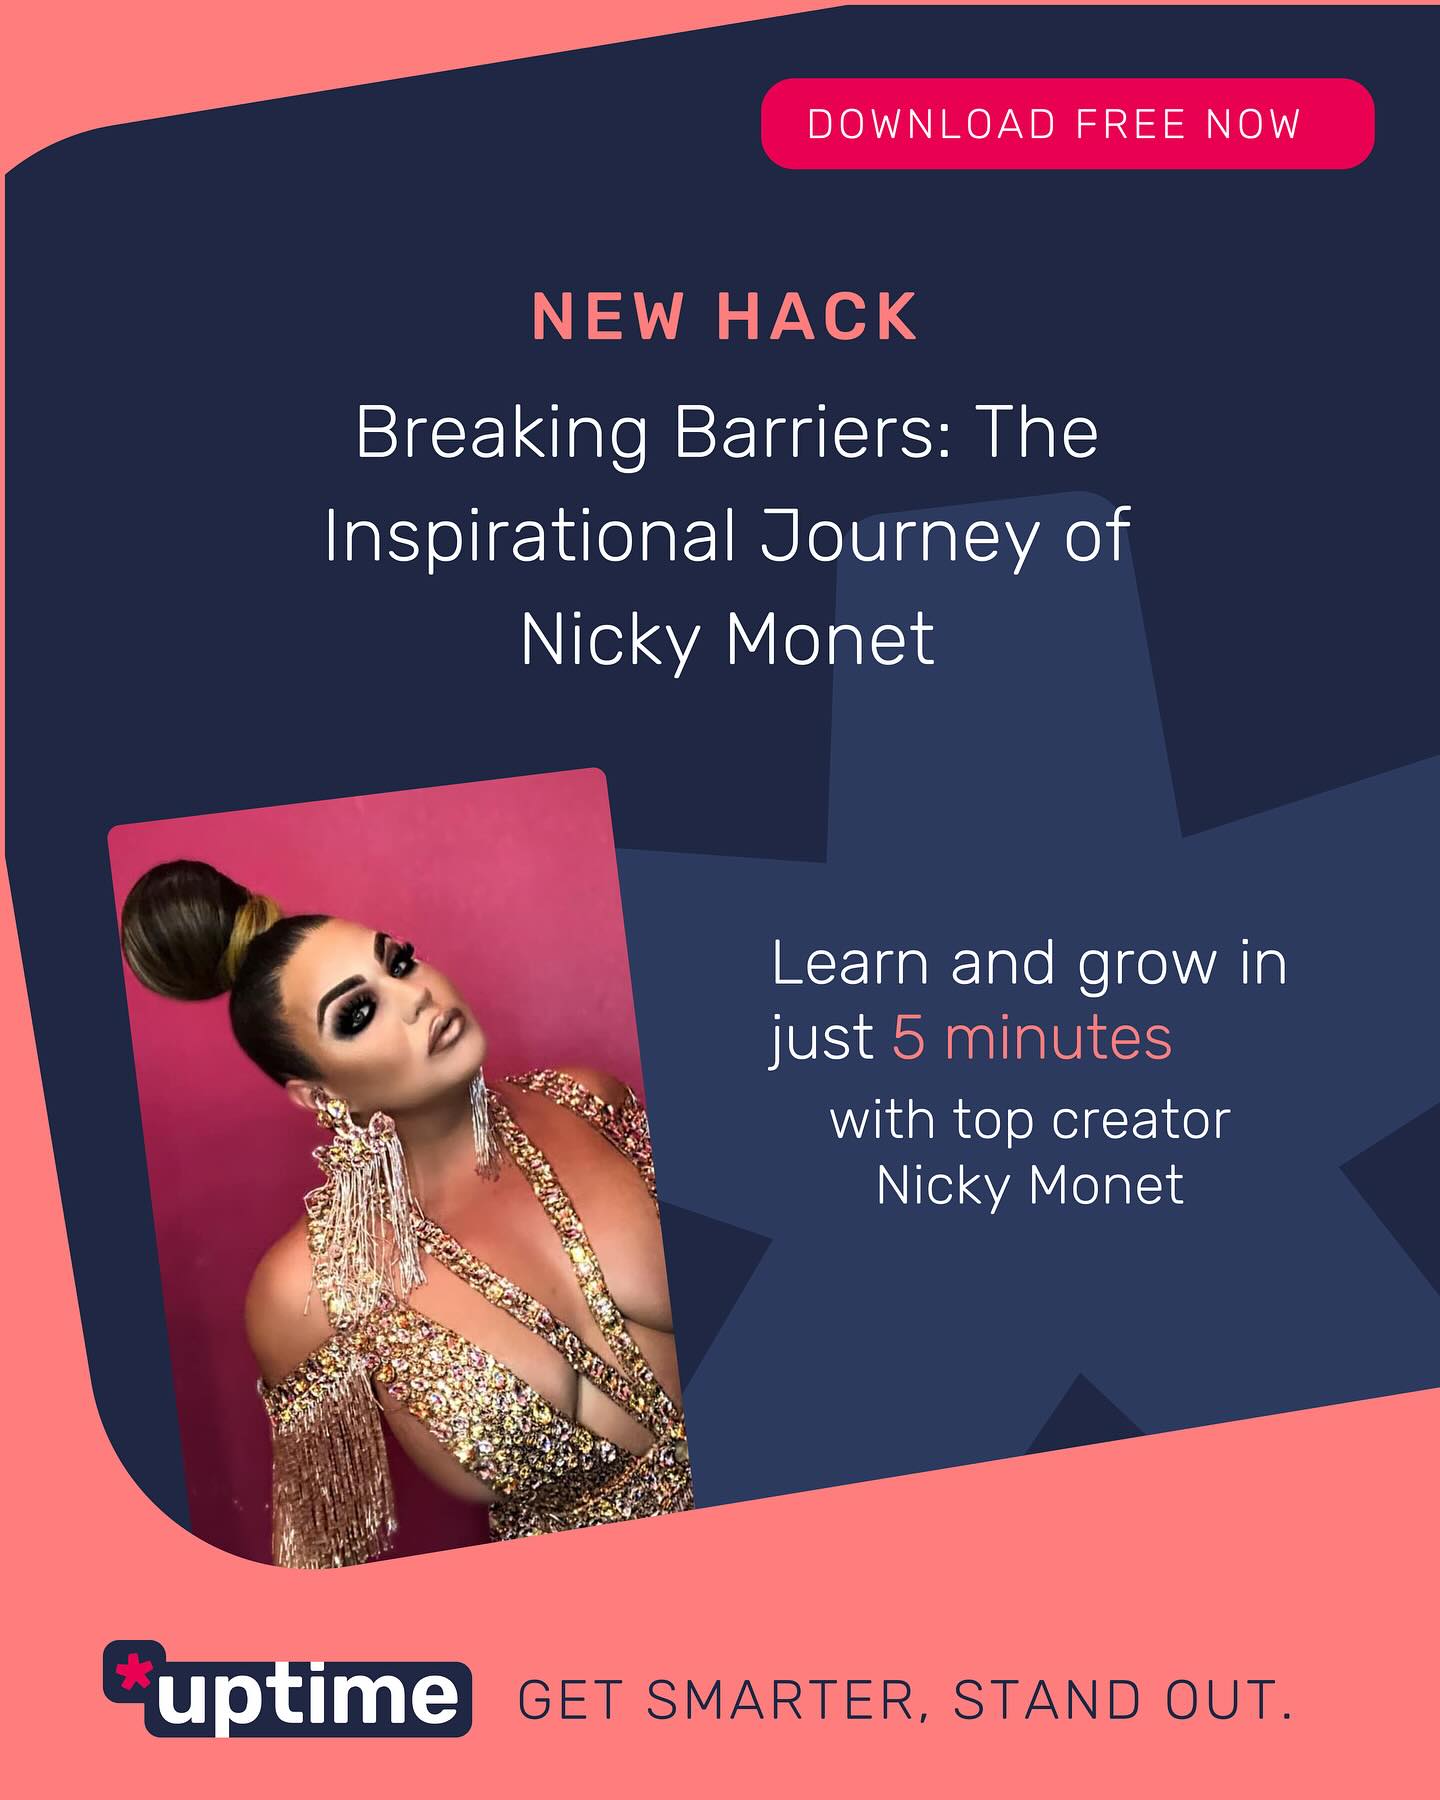 Ready to be inspired? 🌟 Dive into @nickymonet’s journey from dancer to celebrated drag queen and activist! In this Hack, discover how she’s spreading kindness and acceptance. 💖

Find more on the app. Link in Bio.

#Inspiration #KindnessMatters #NickyMonet #UptimeApp #NewHack